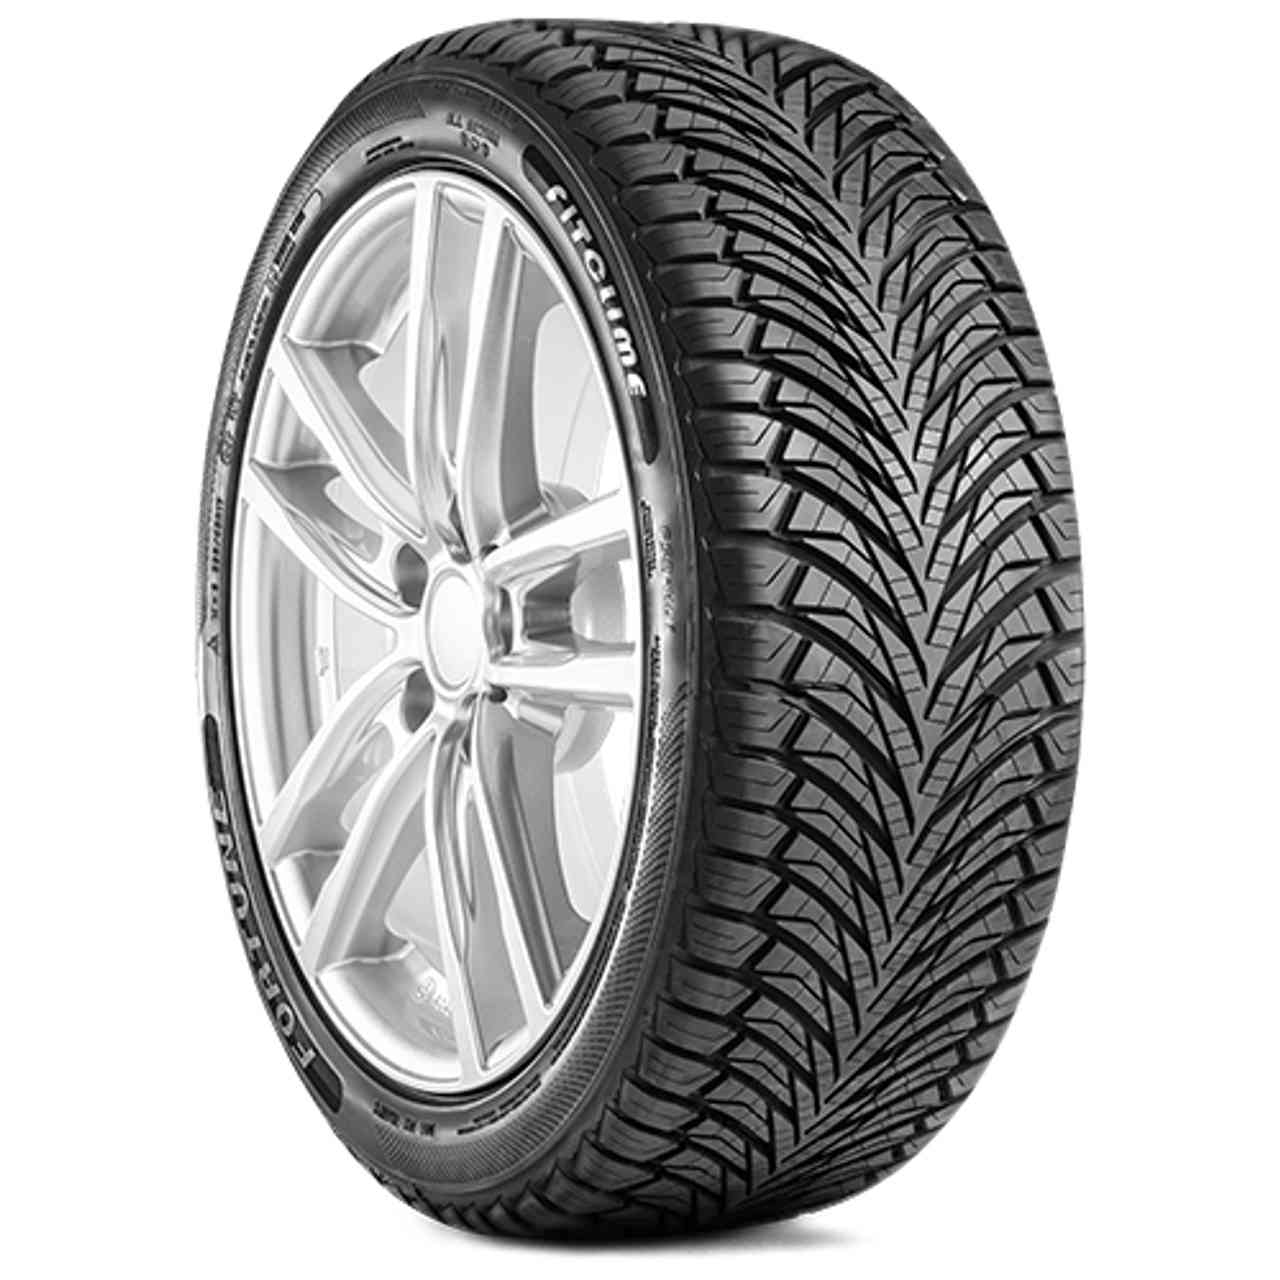 FORTUNE FITCLIME FSR-401 165/60R14 79H BSW XL